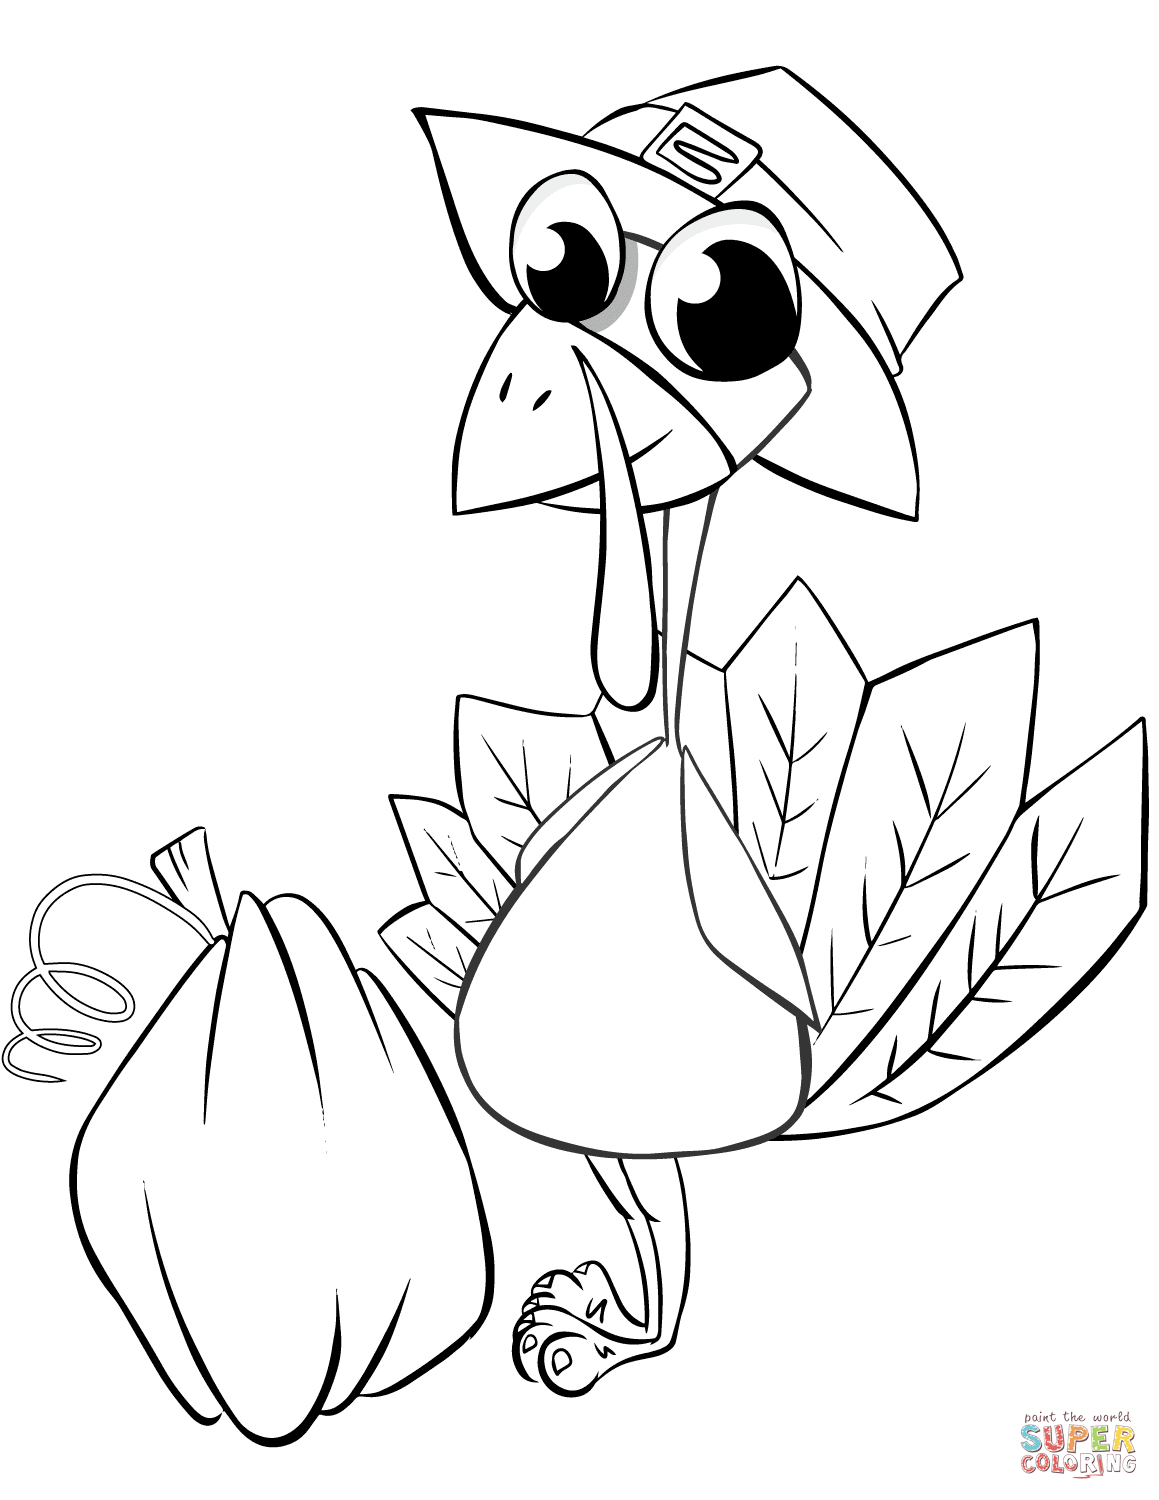 Turkey coloring pages | Free Coloring Pages